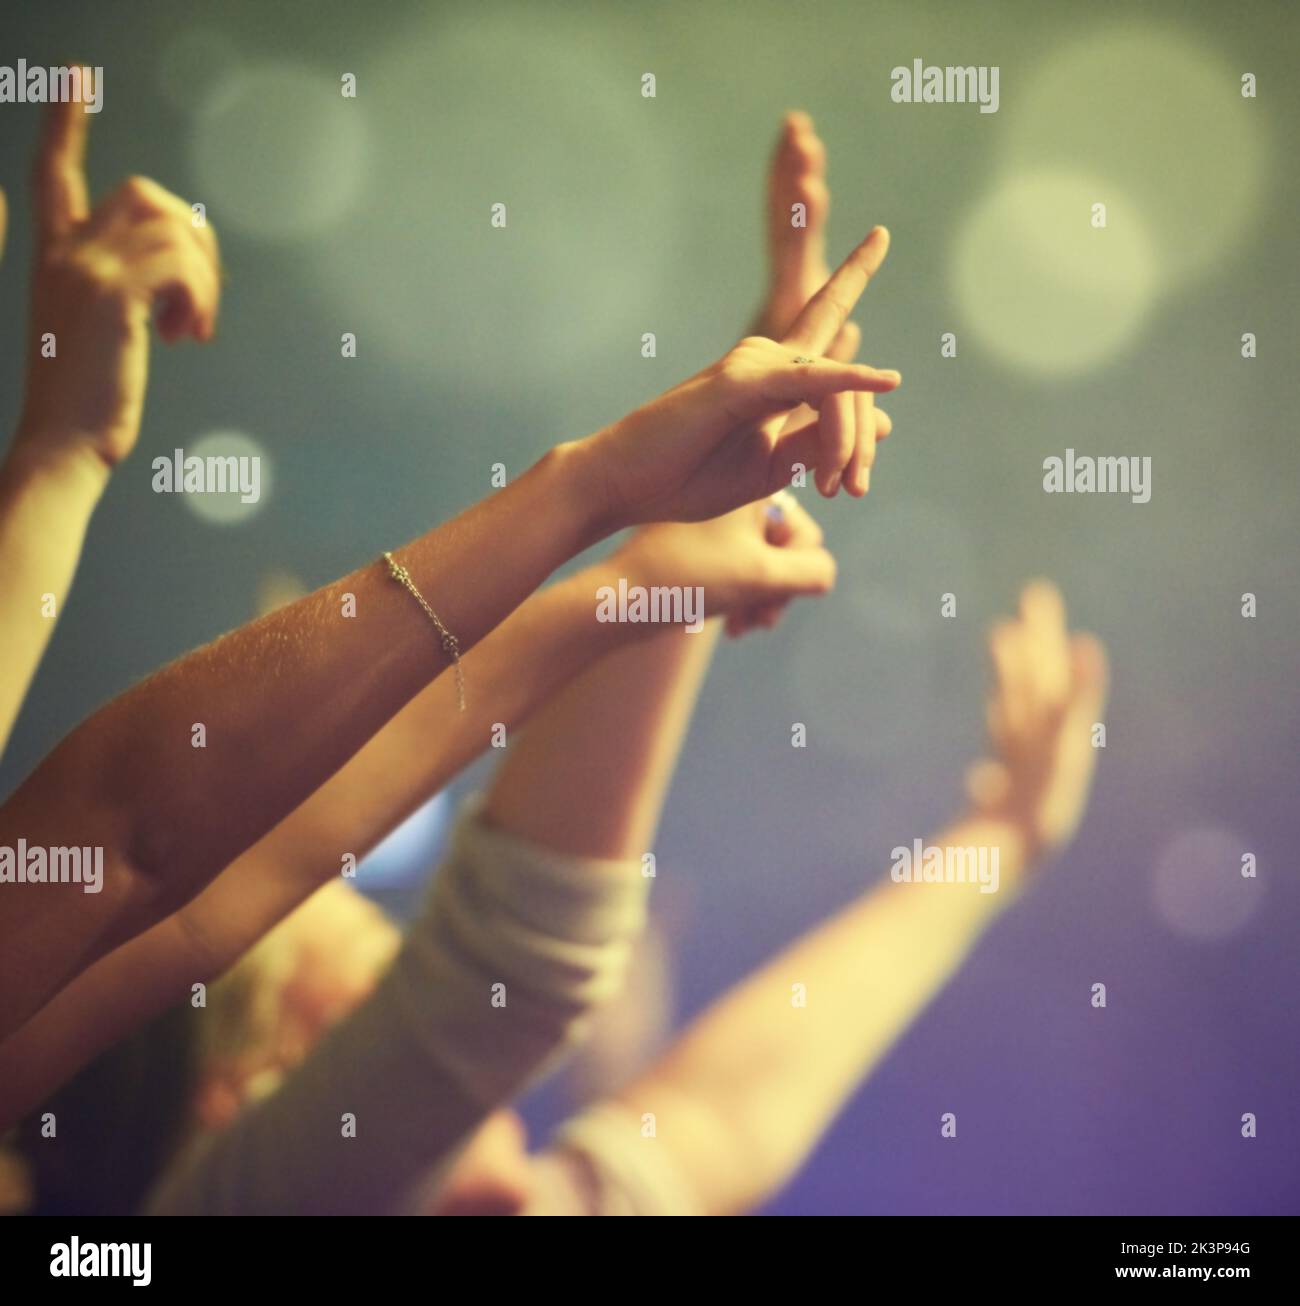 Reaching out to the performers. Cropped image of hands raised and reaching towards the stage gesturing rock on. Stock Photo